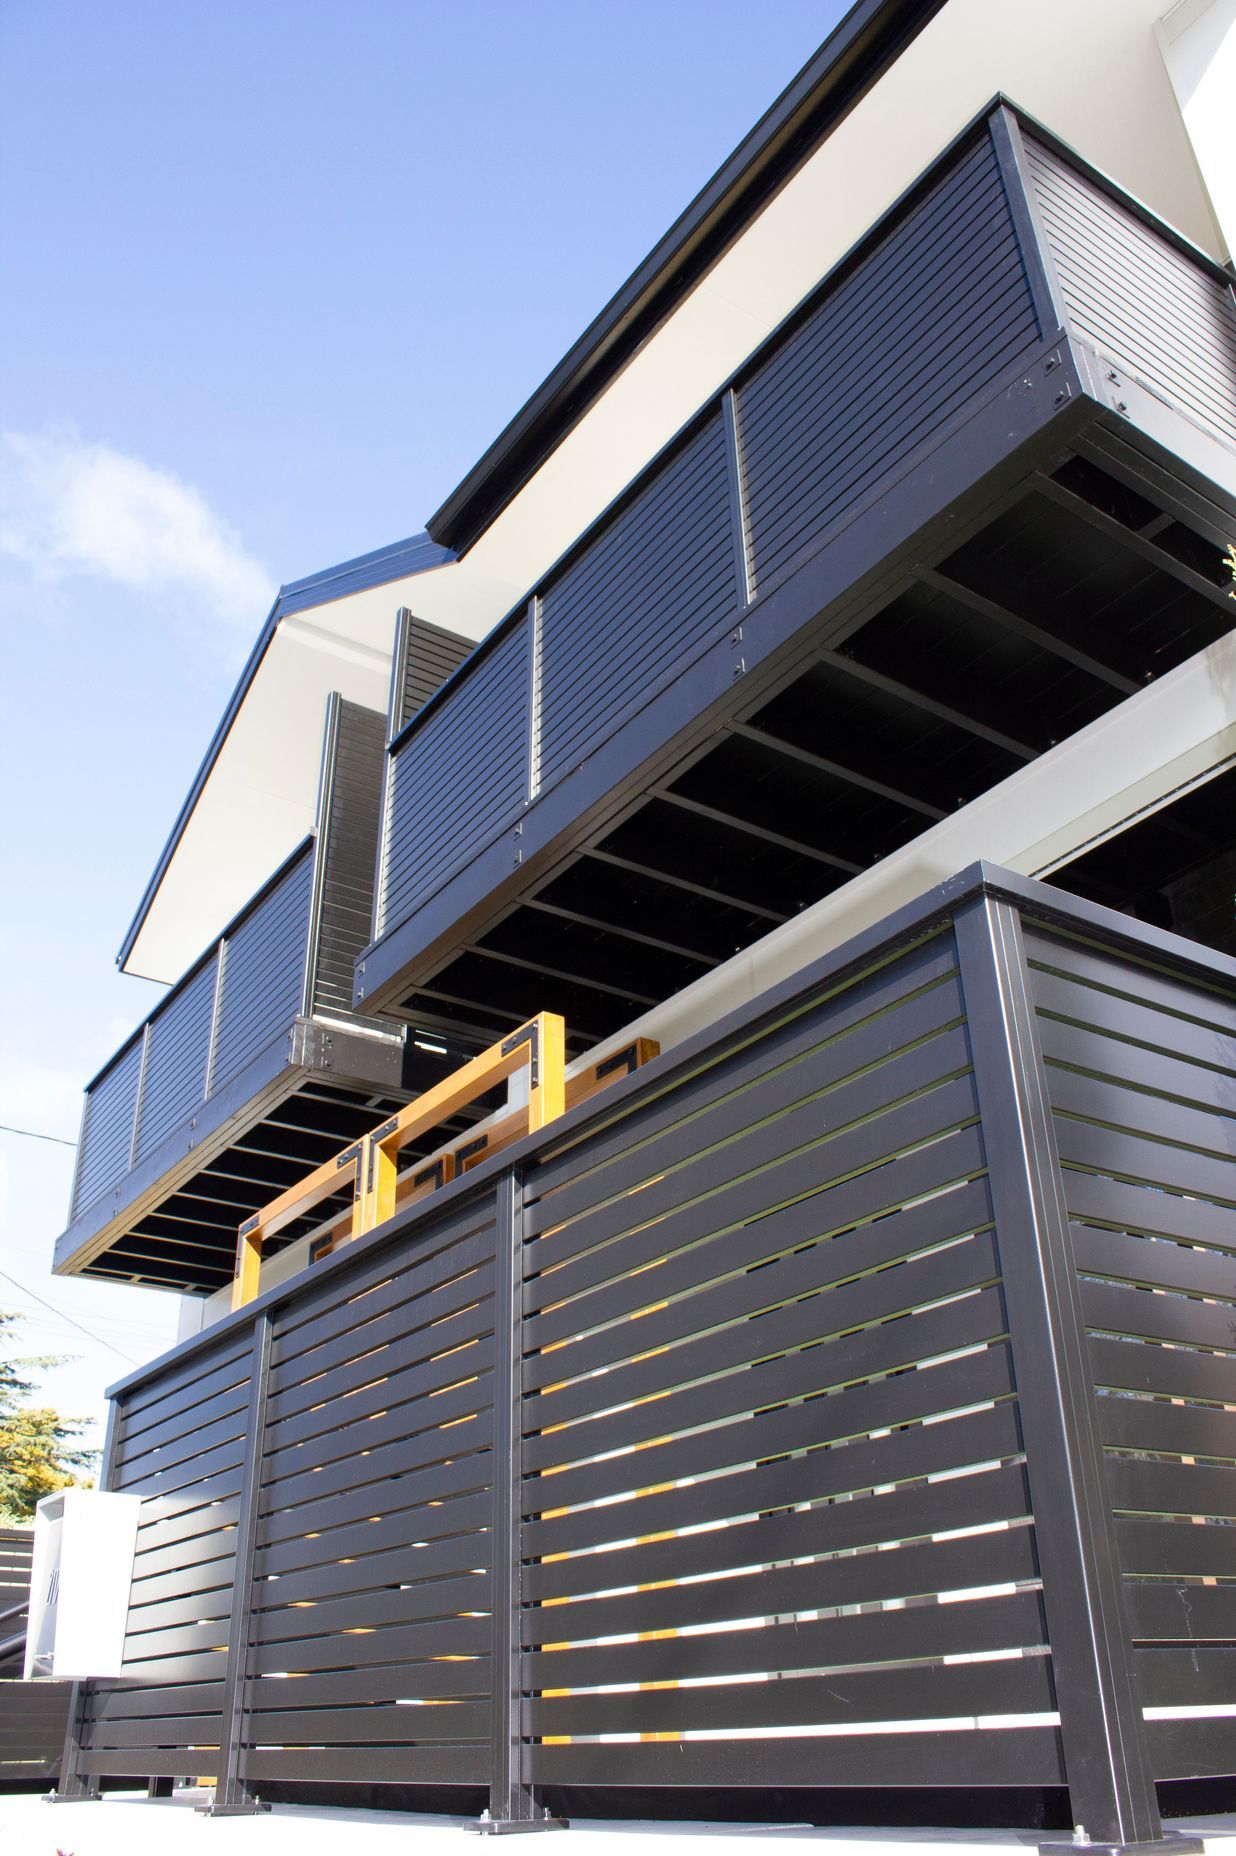 The solution offers residents both privacy and a safe deck barrier.